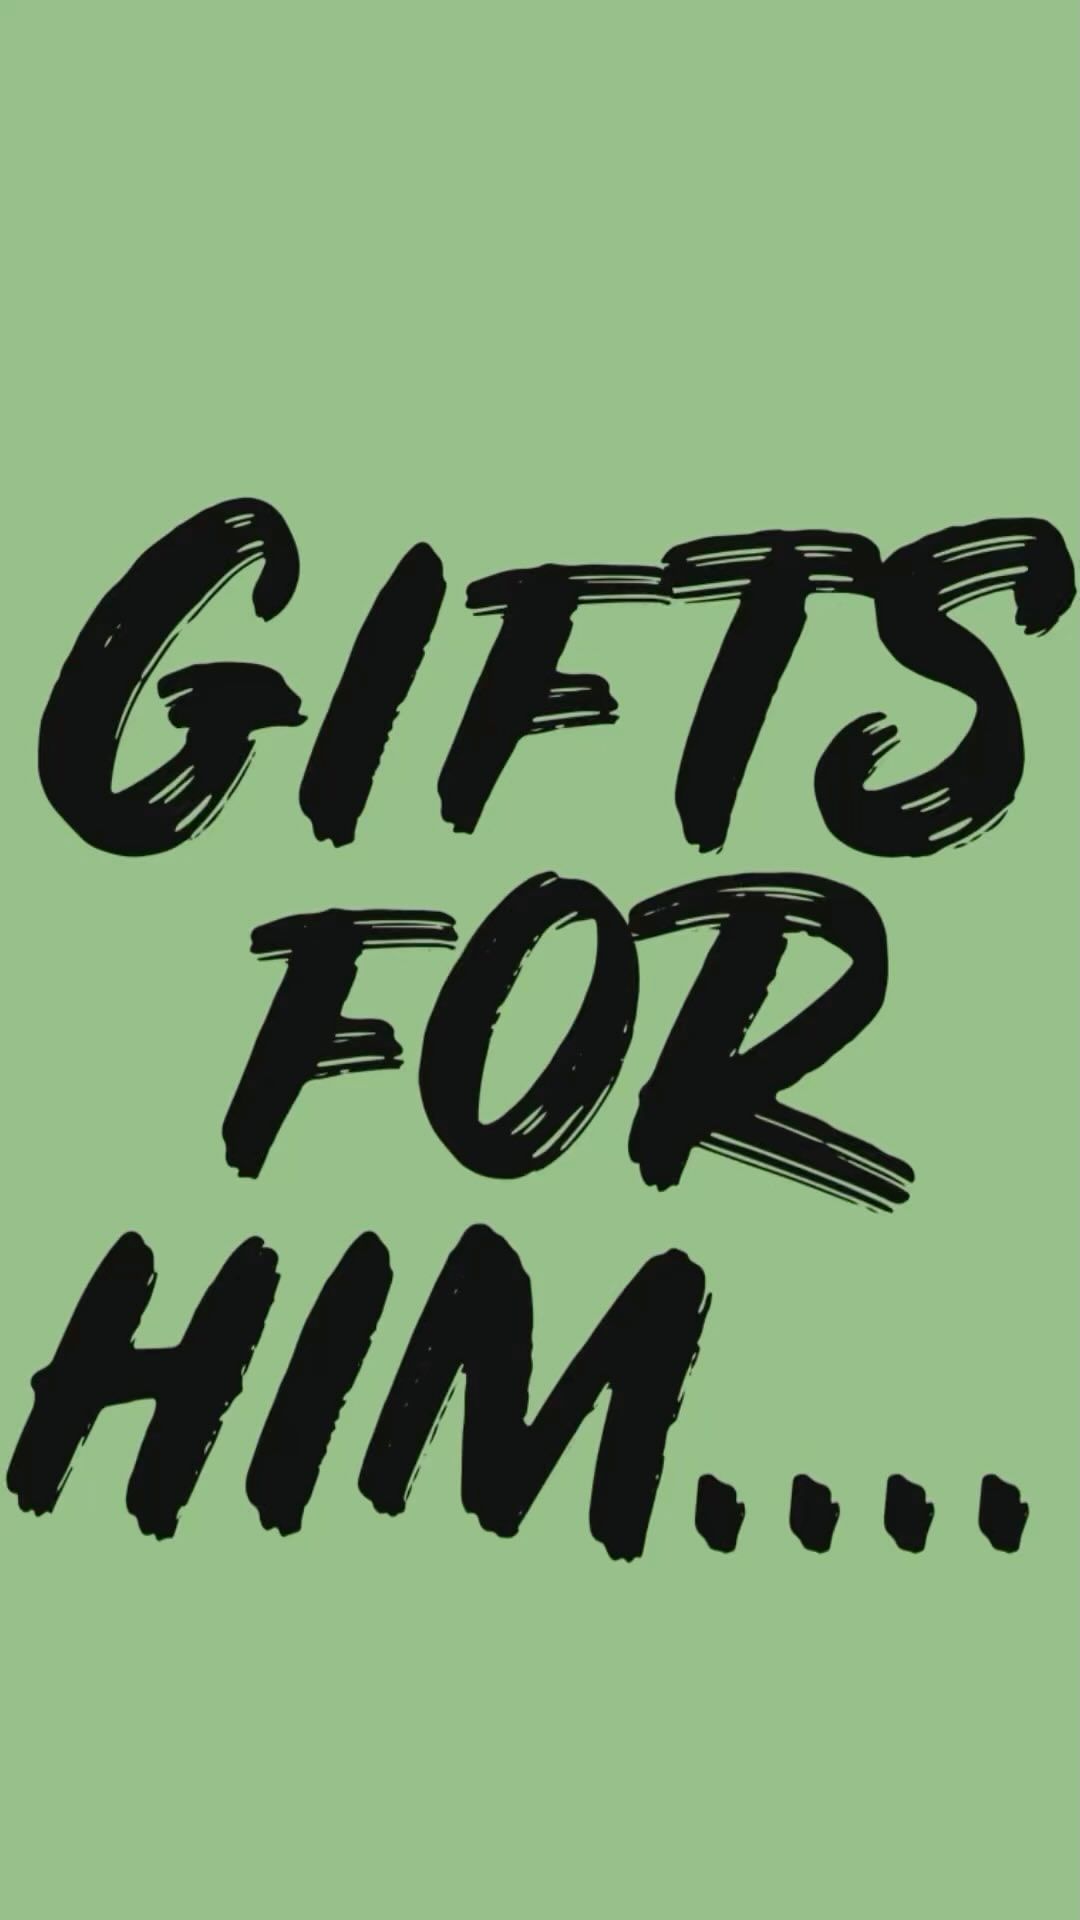 Here to help choose that perfect present … #gift #giftsforhim #shoplocal #sma...